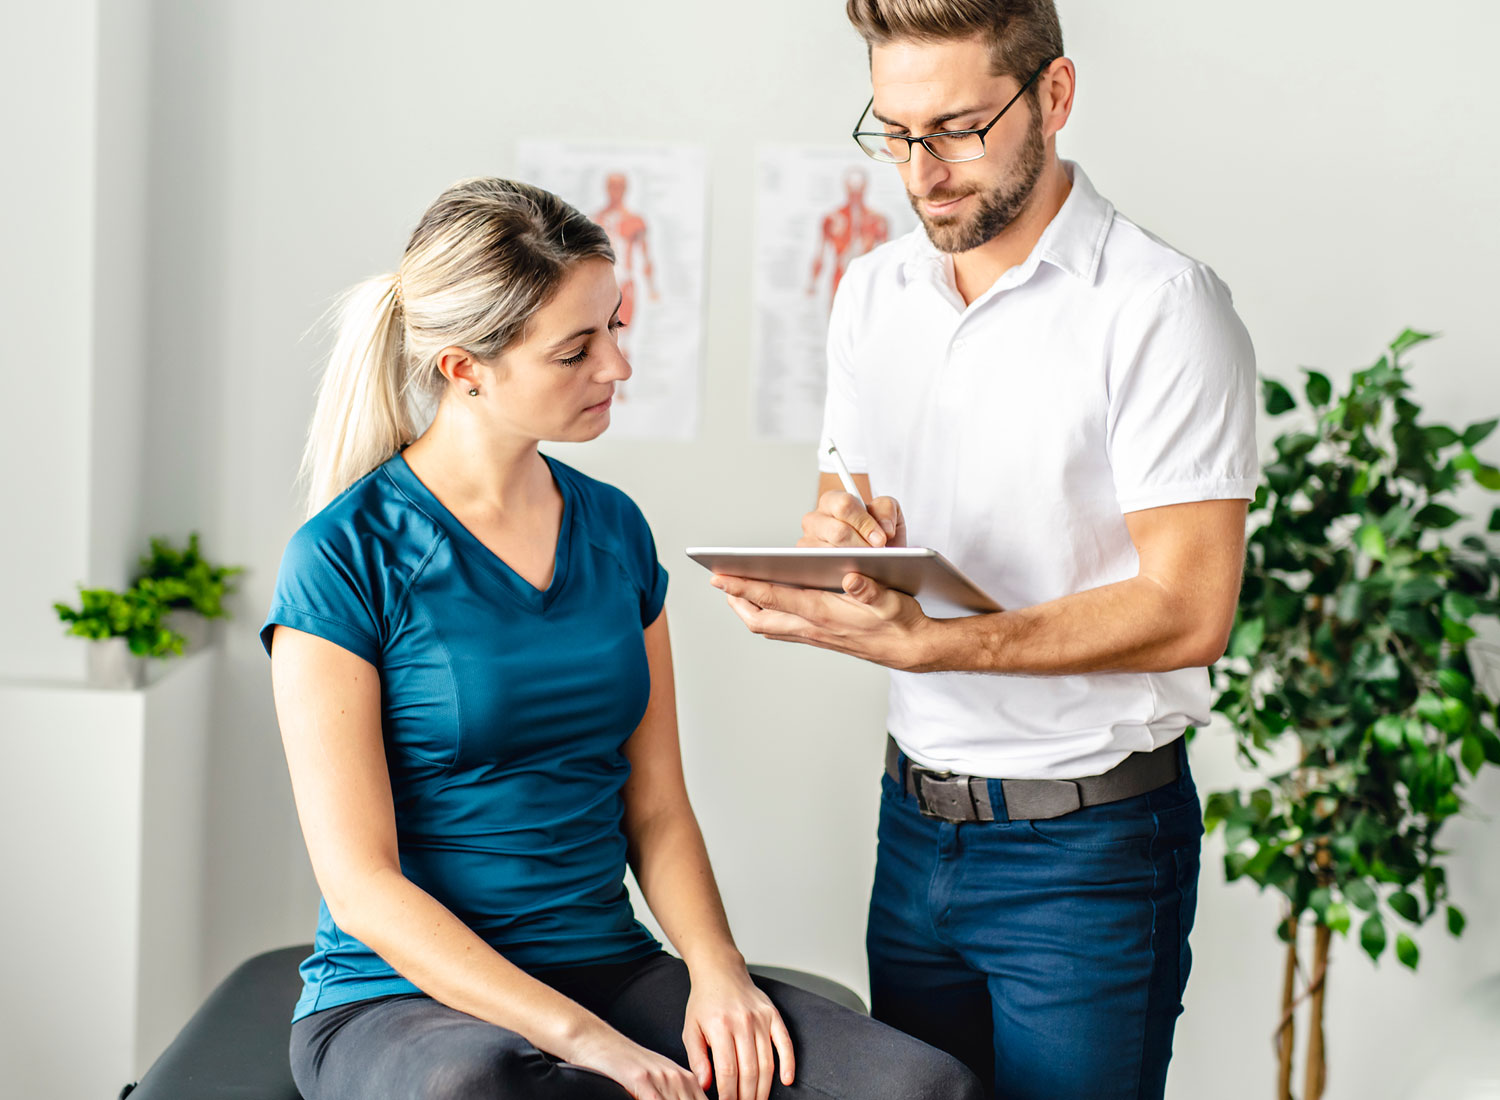 Chiropractic doctor discussing notes with a patient